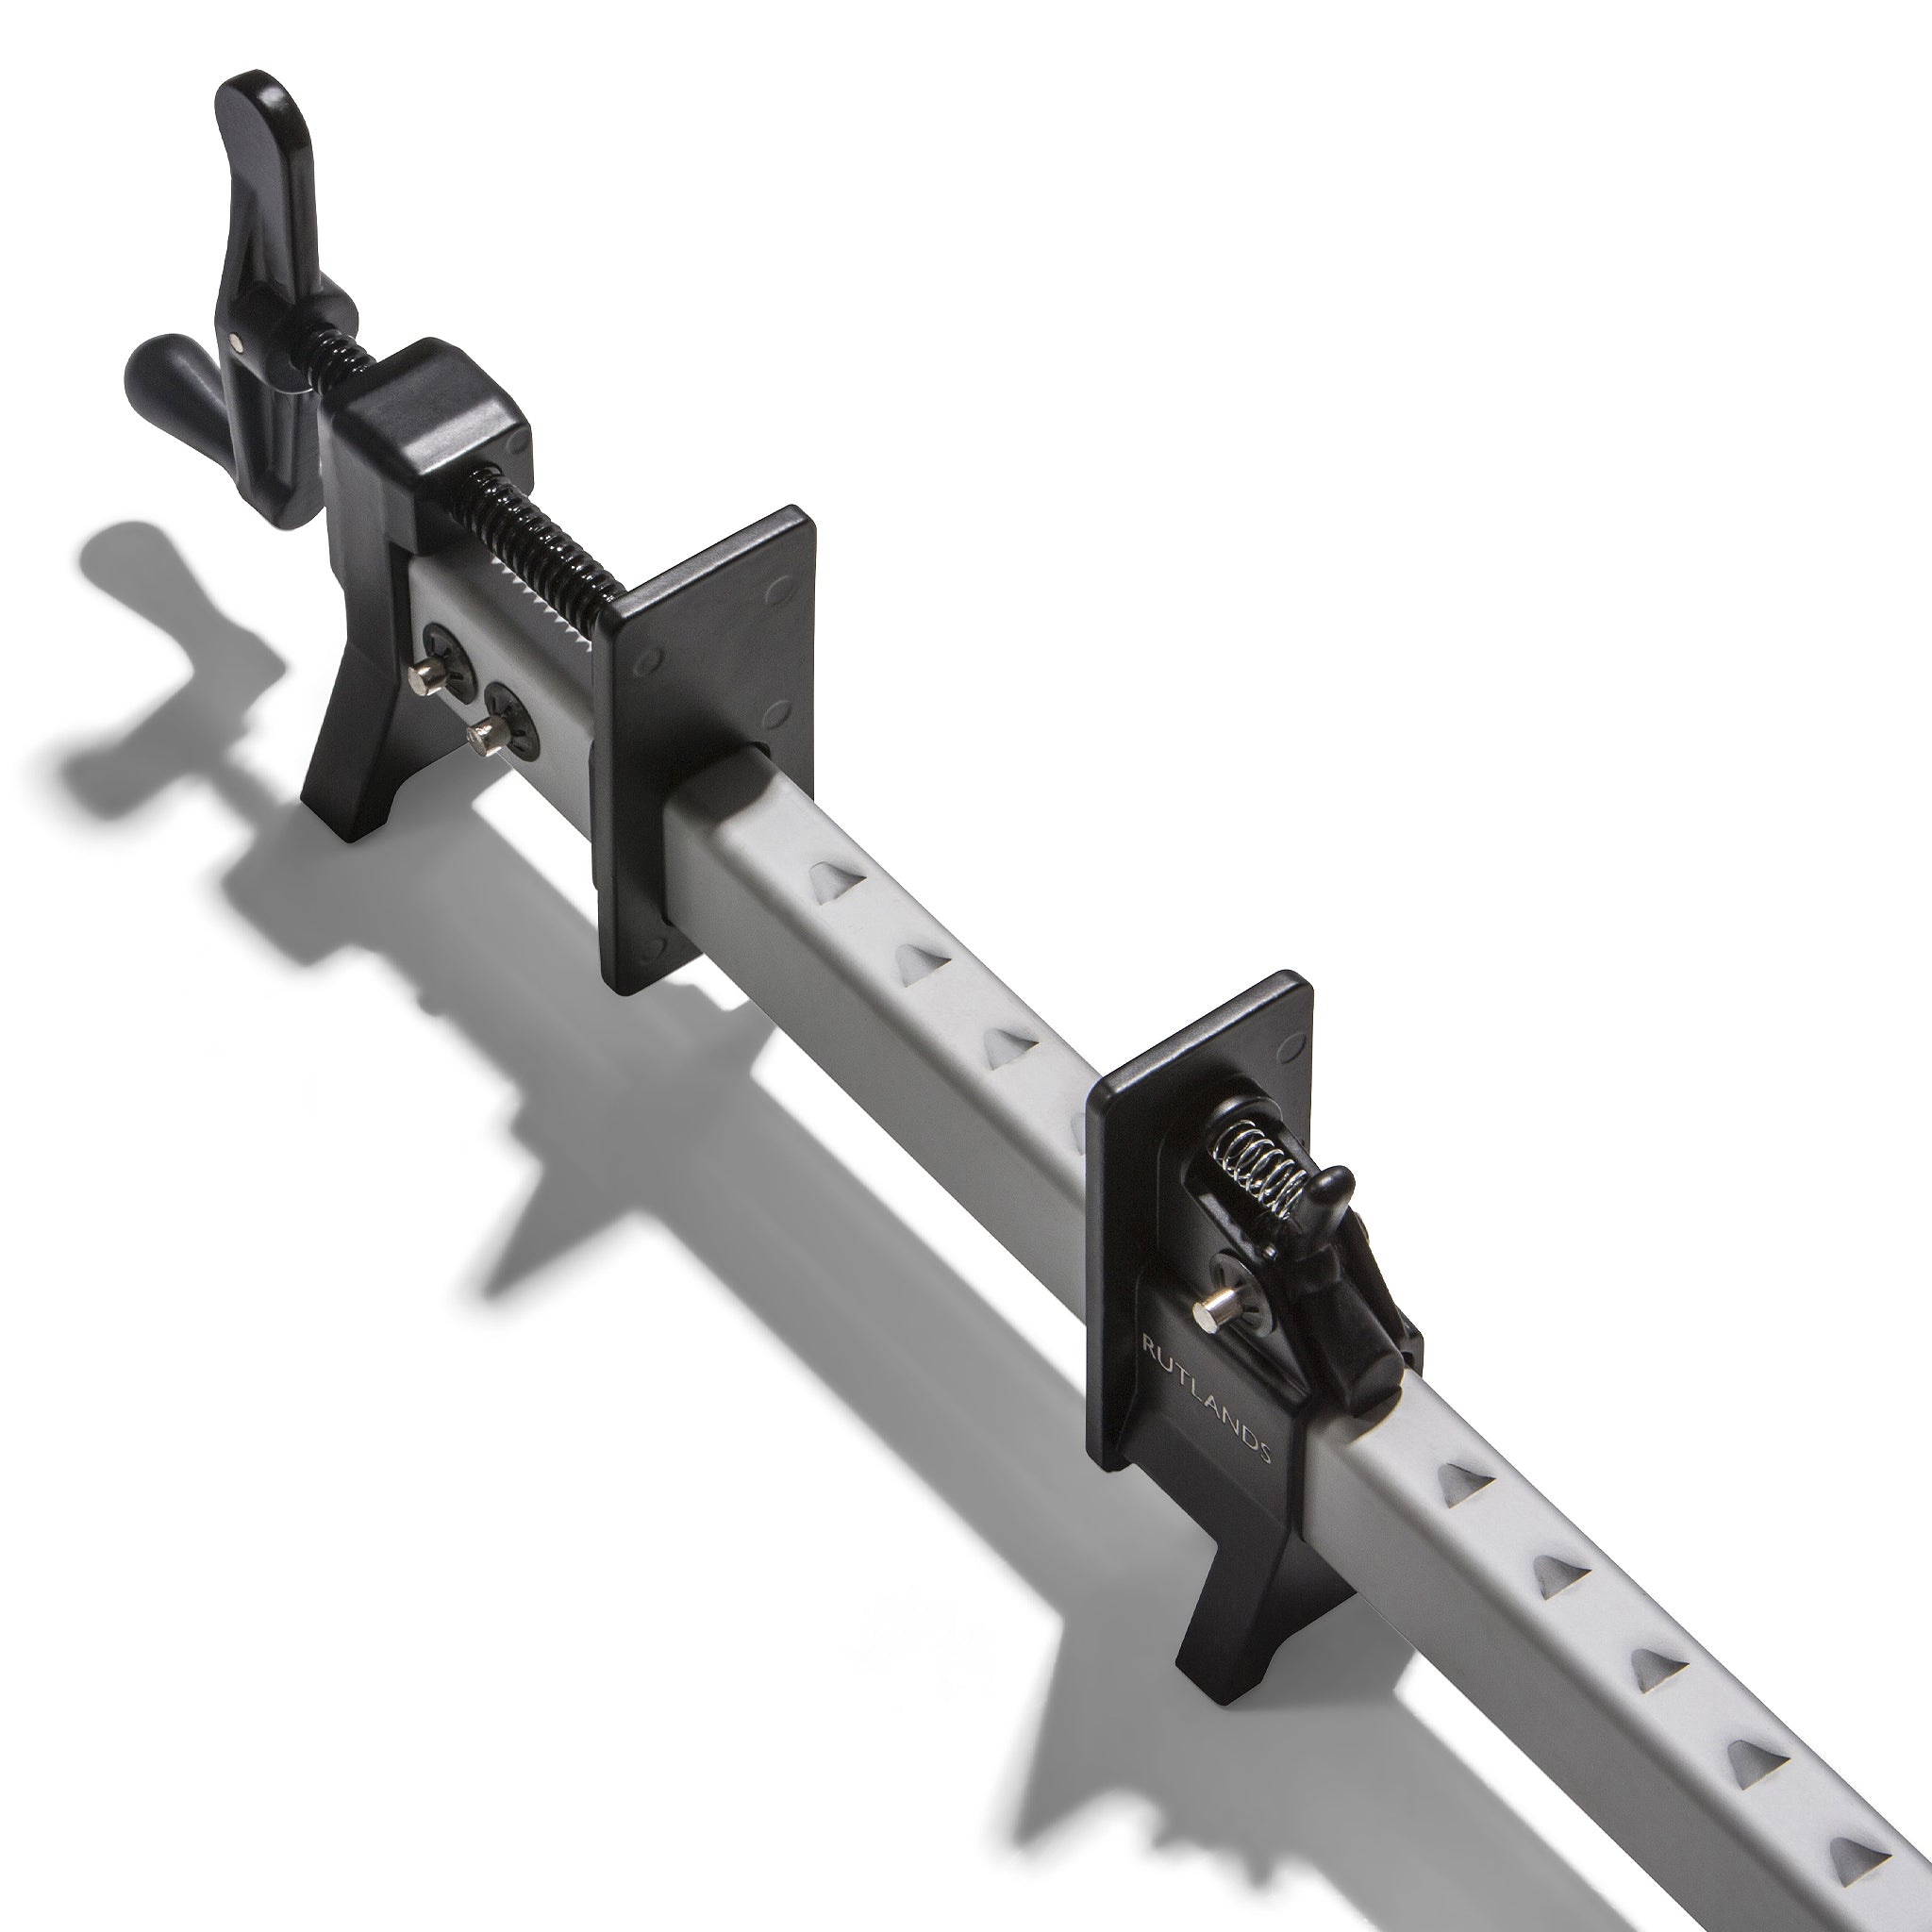 Aluminium Sash Clamps with Feet - 1200mm - Pack of 4